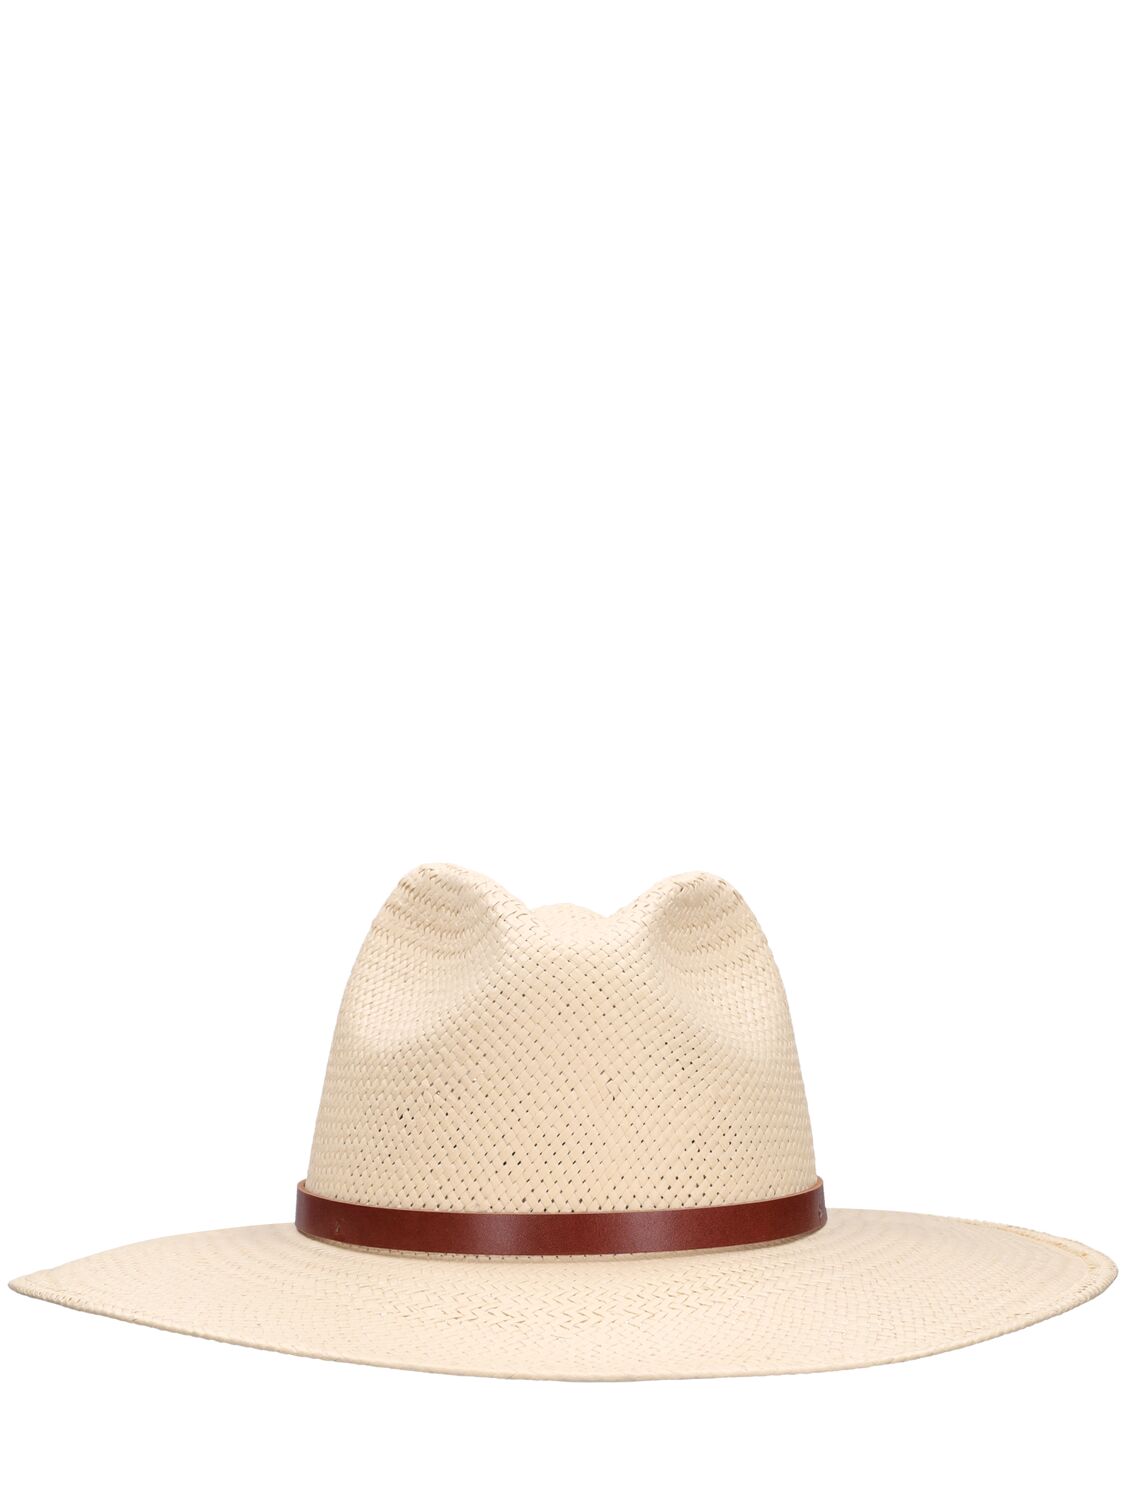 Janessa Leone Judith Packable Fedora In Natural